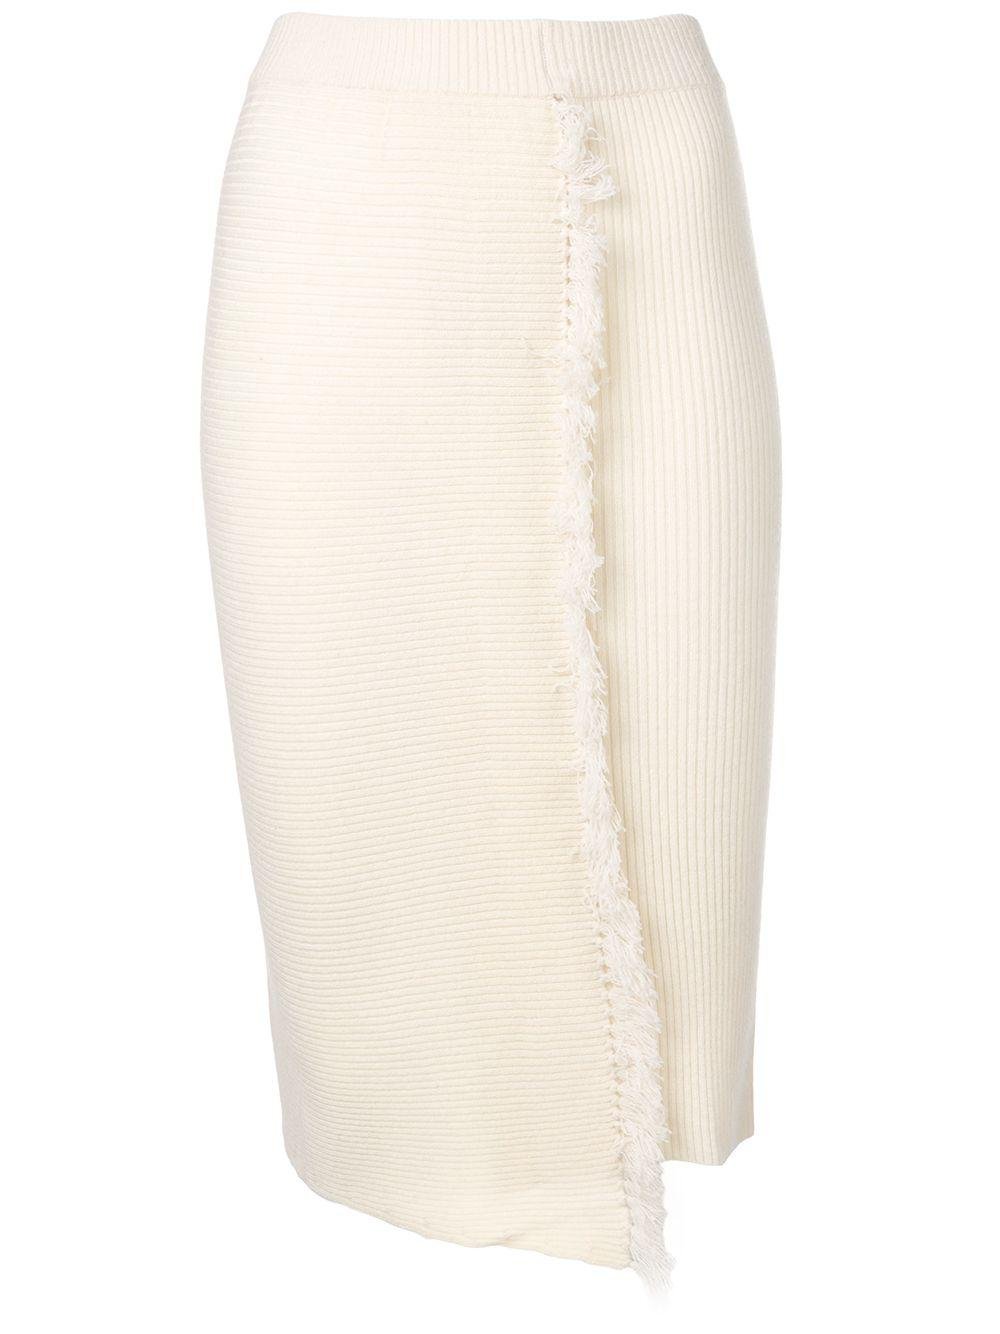 high-waisted fringed skirt by CASHMERE IN LOVE